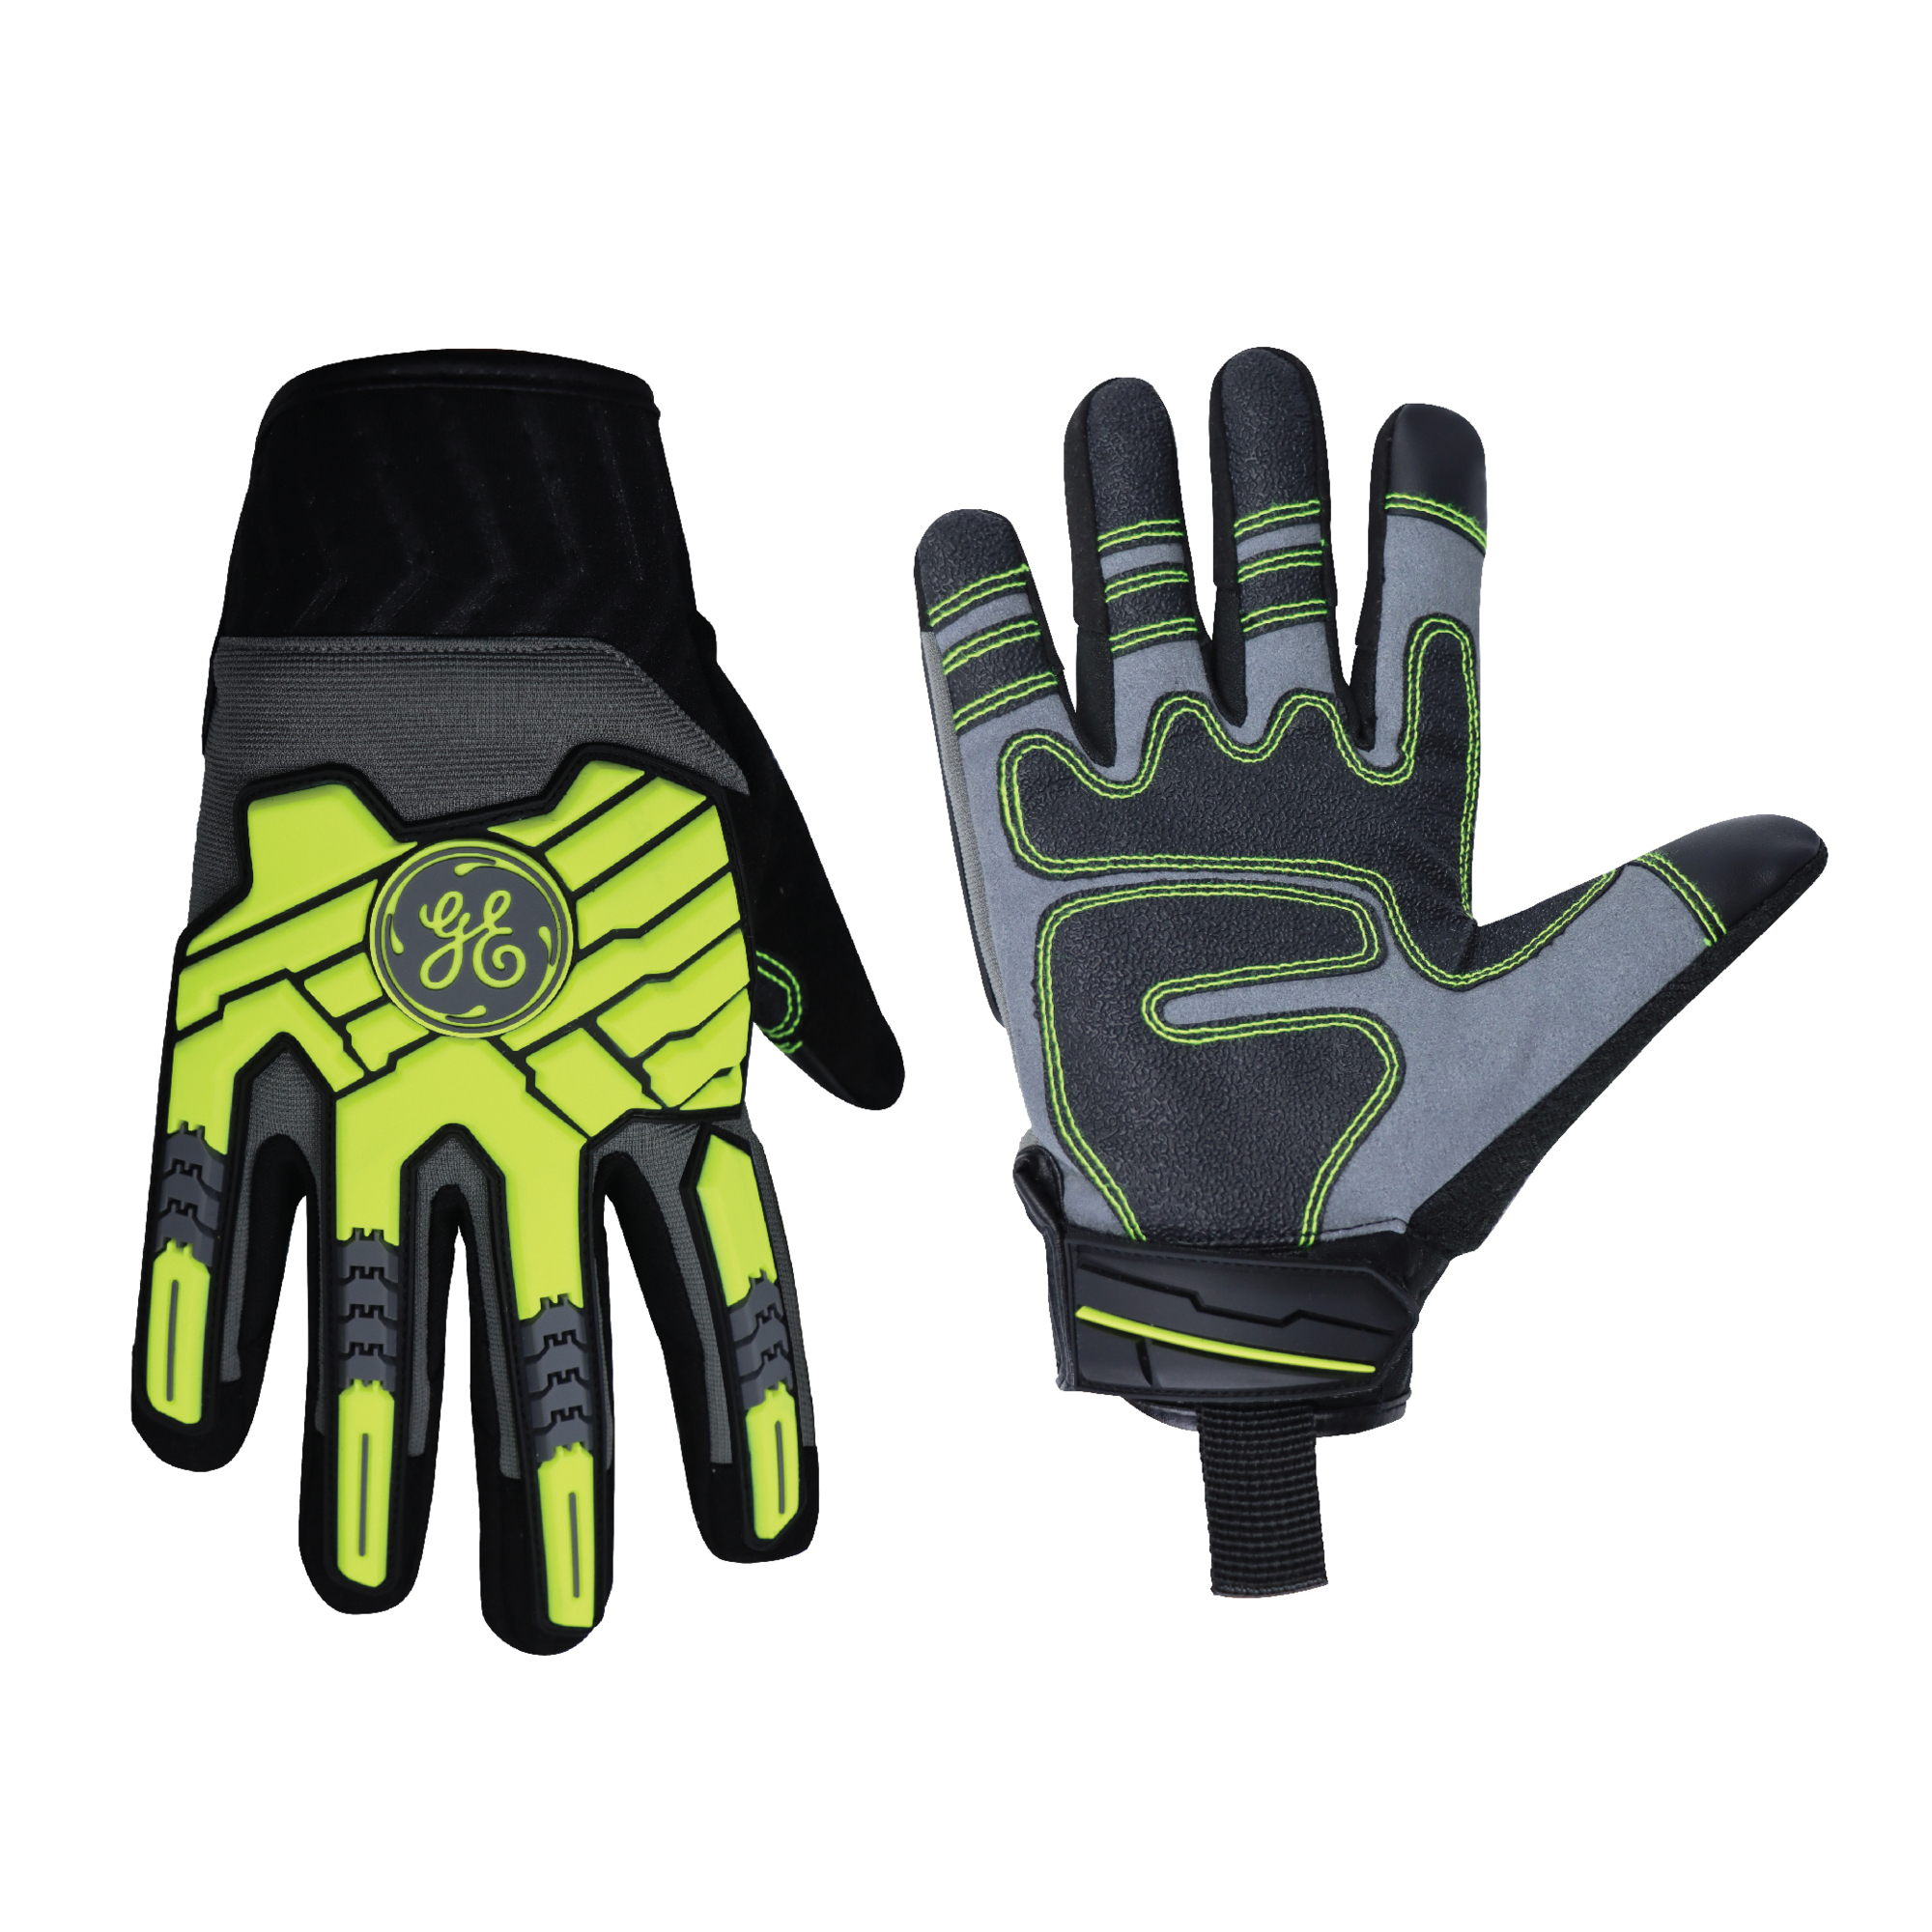 General Electric, Mechanic's Glove High-Vis Green M 1 pair, Size M, Included (qty.) 1, Model GG417MC